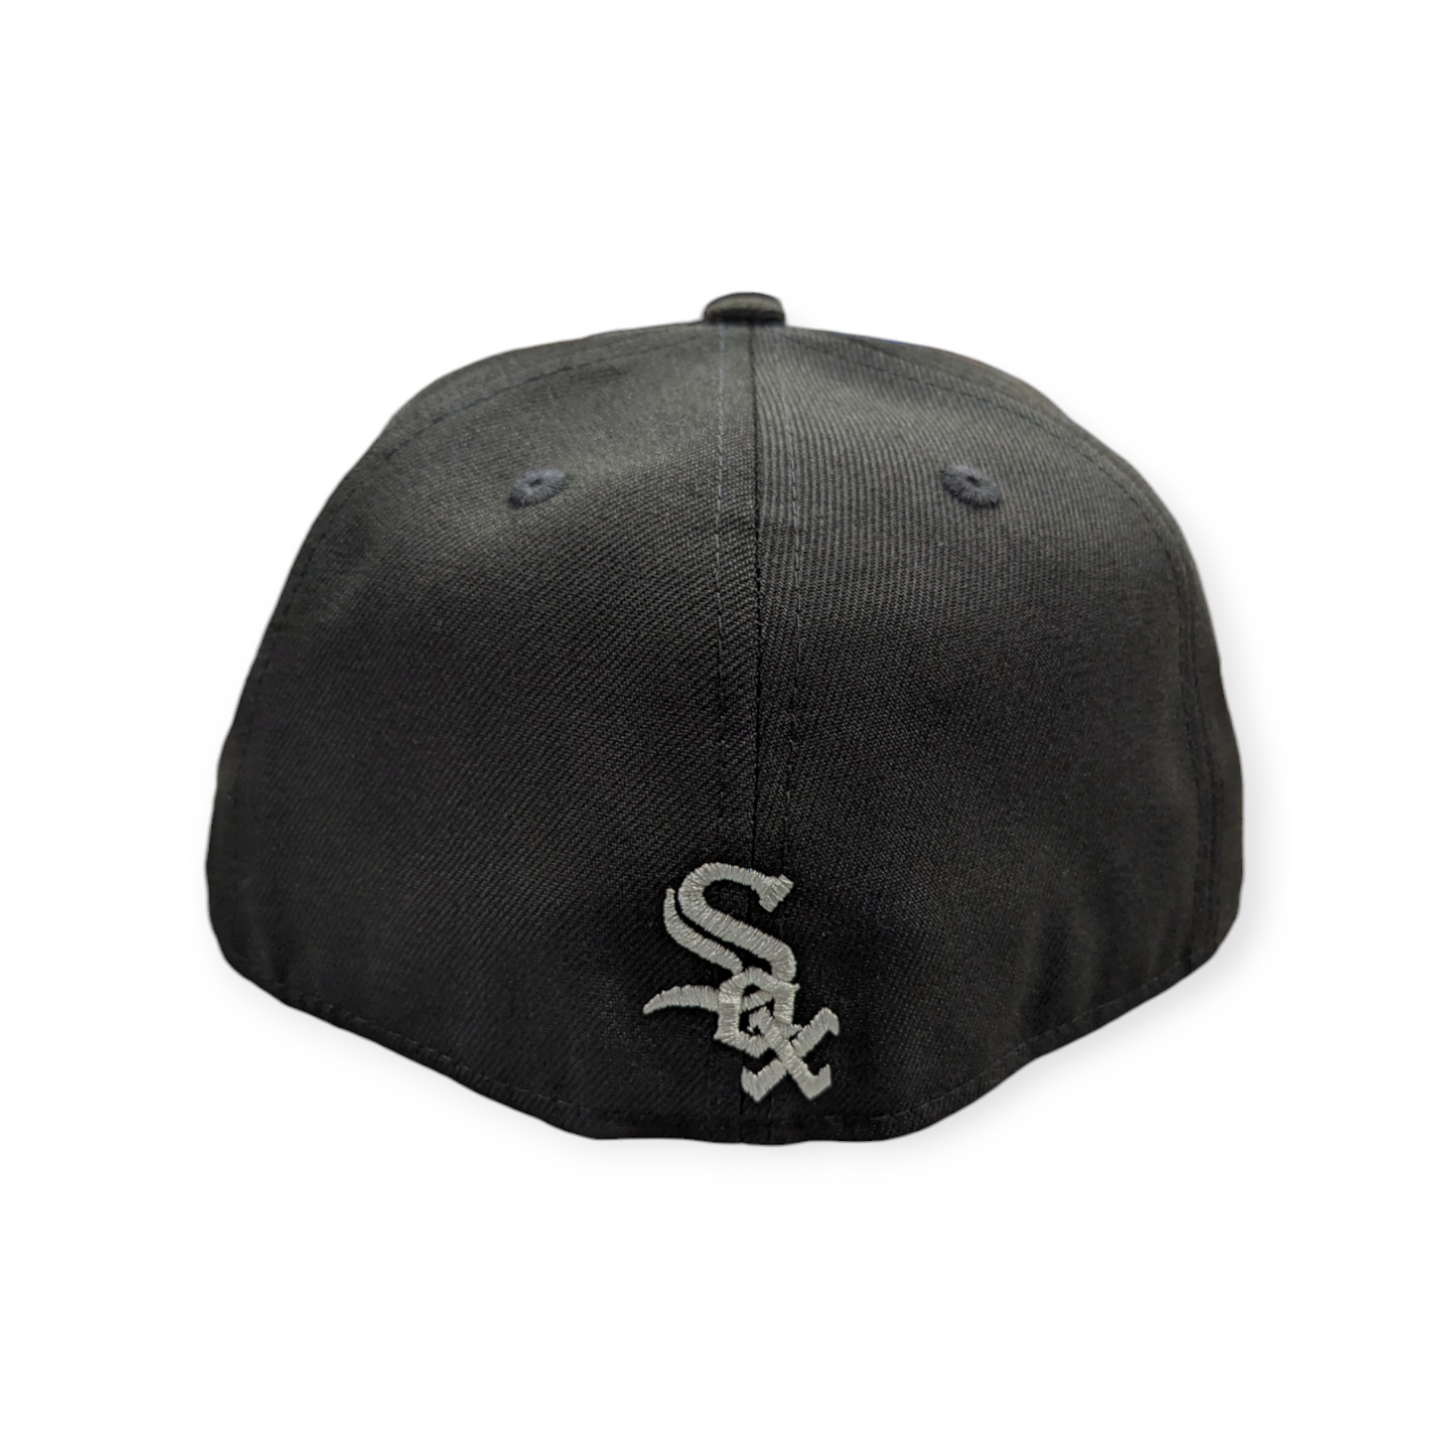 Chicago White Sox New Era Comiskey Park Gray/Black 59FIFTY Fitted Hat